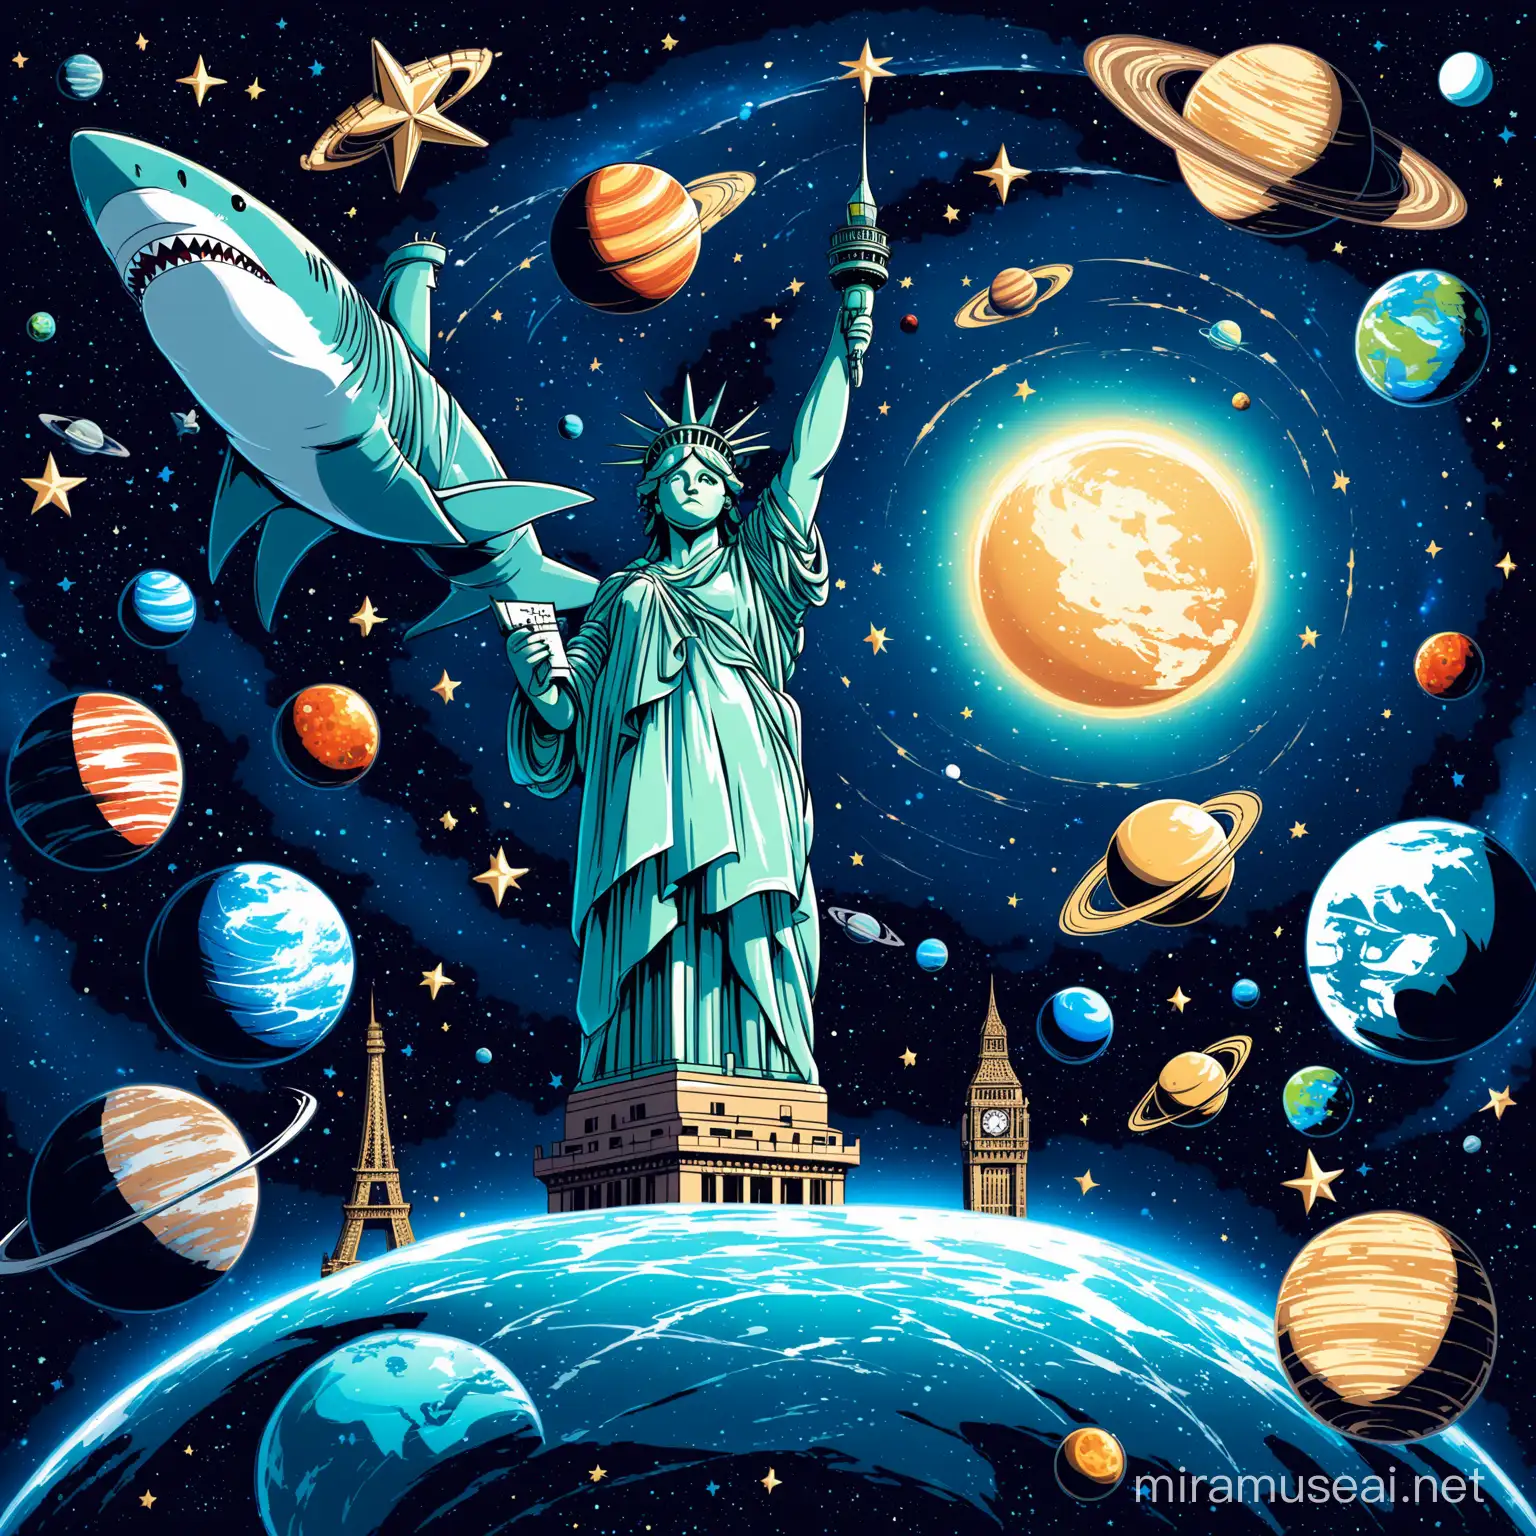  STATUE OF LIBERTY, SHARKS, PLANETS, STARS, EIFFEL TOWER, BIG BEN, HOLLYWOOD, FLOATING IN SPACE